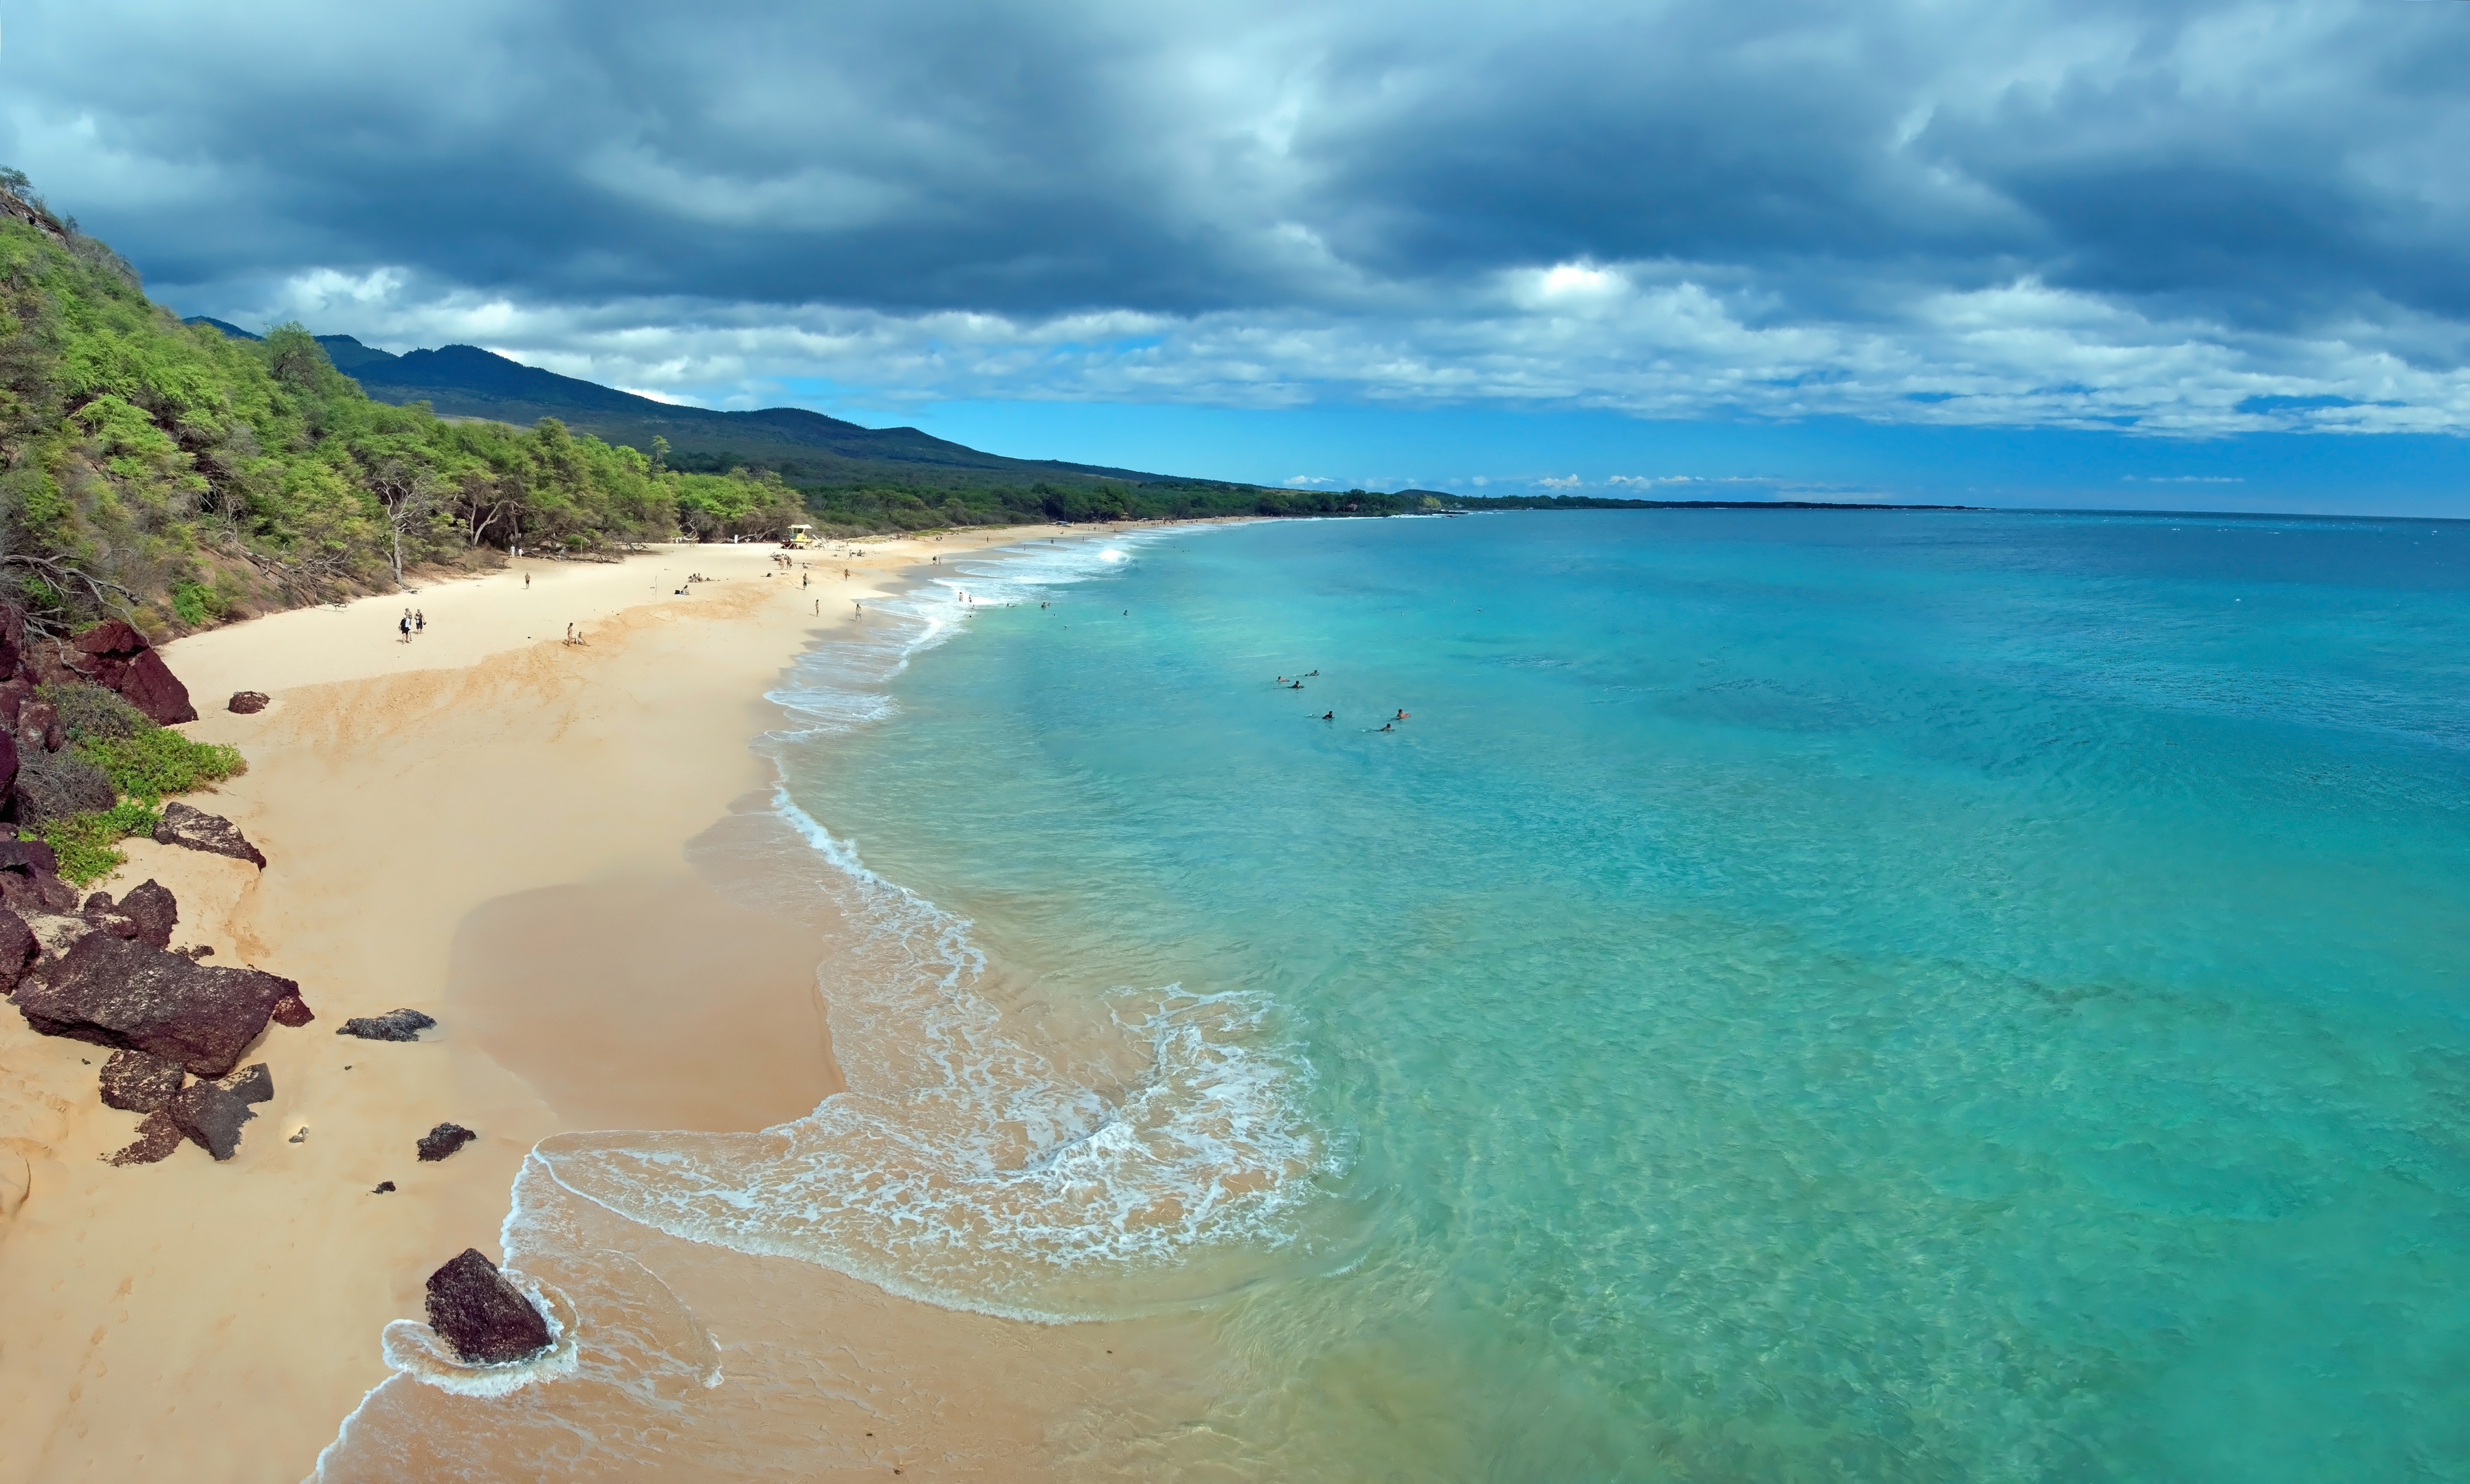 Maui makes for an unforgettable stay.